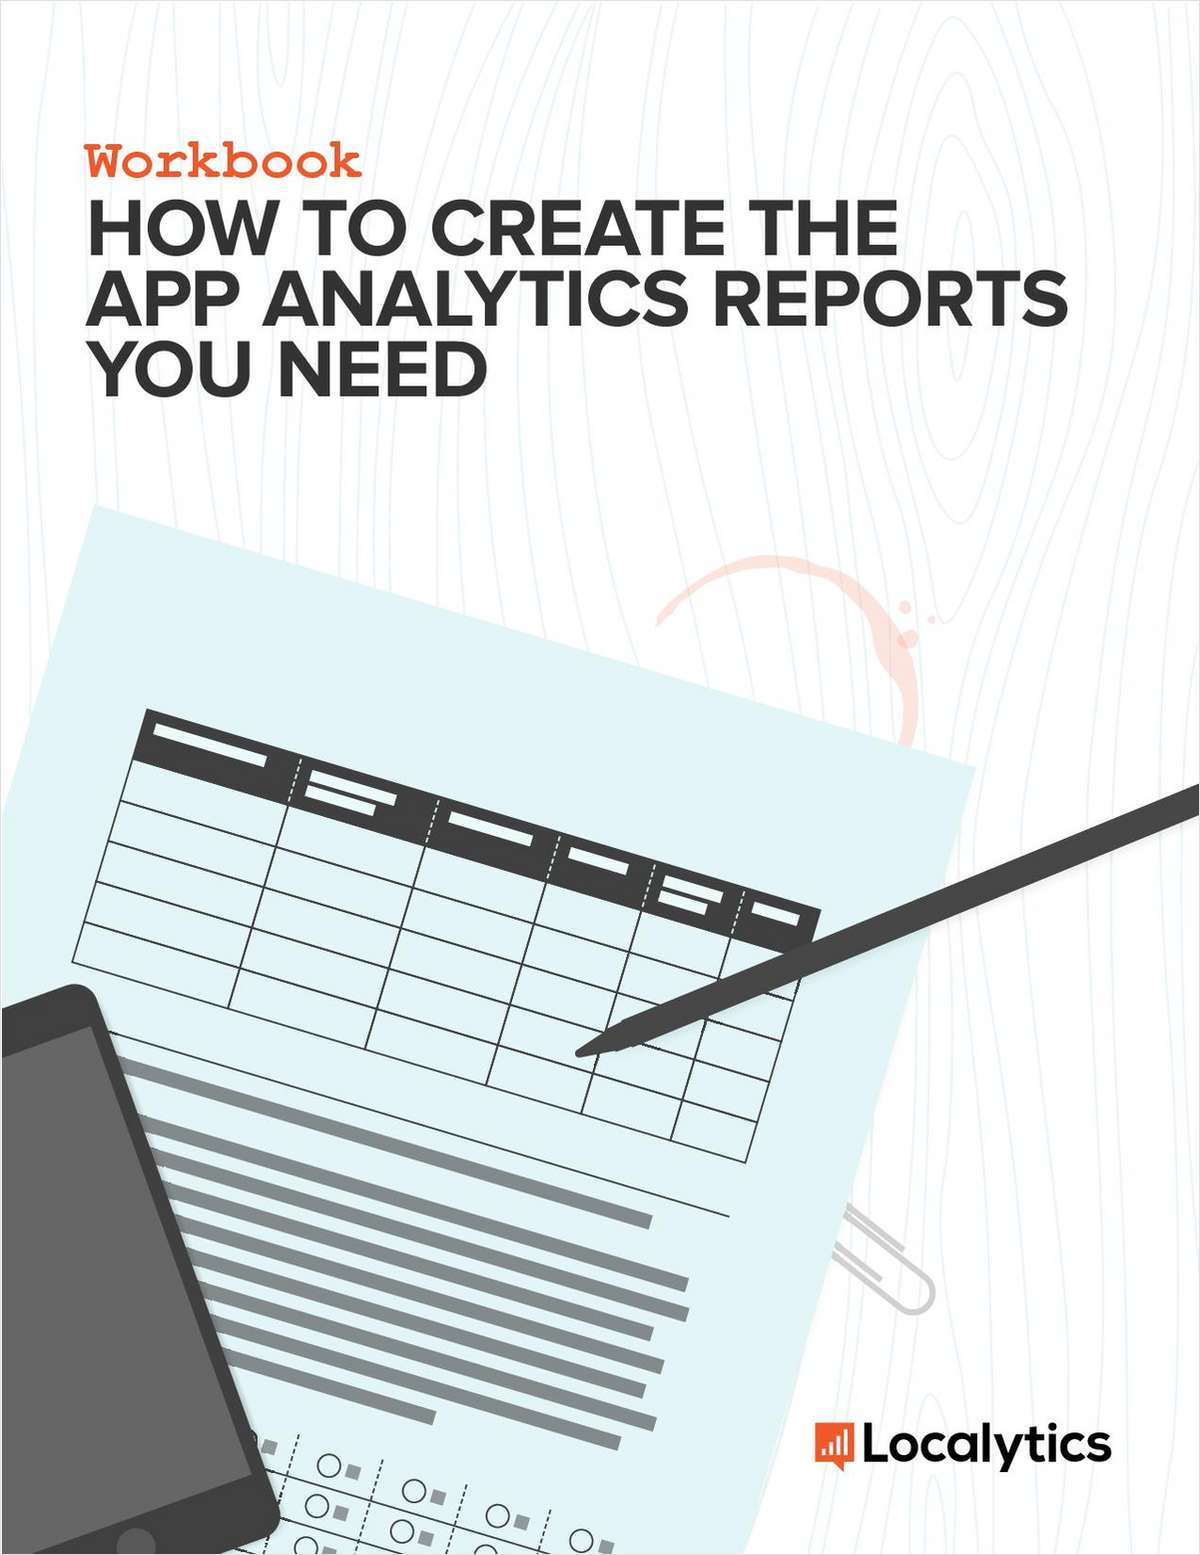 How to Create The App Analytics Reports You Need